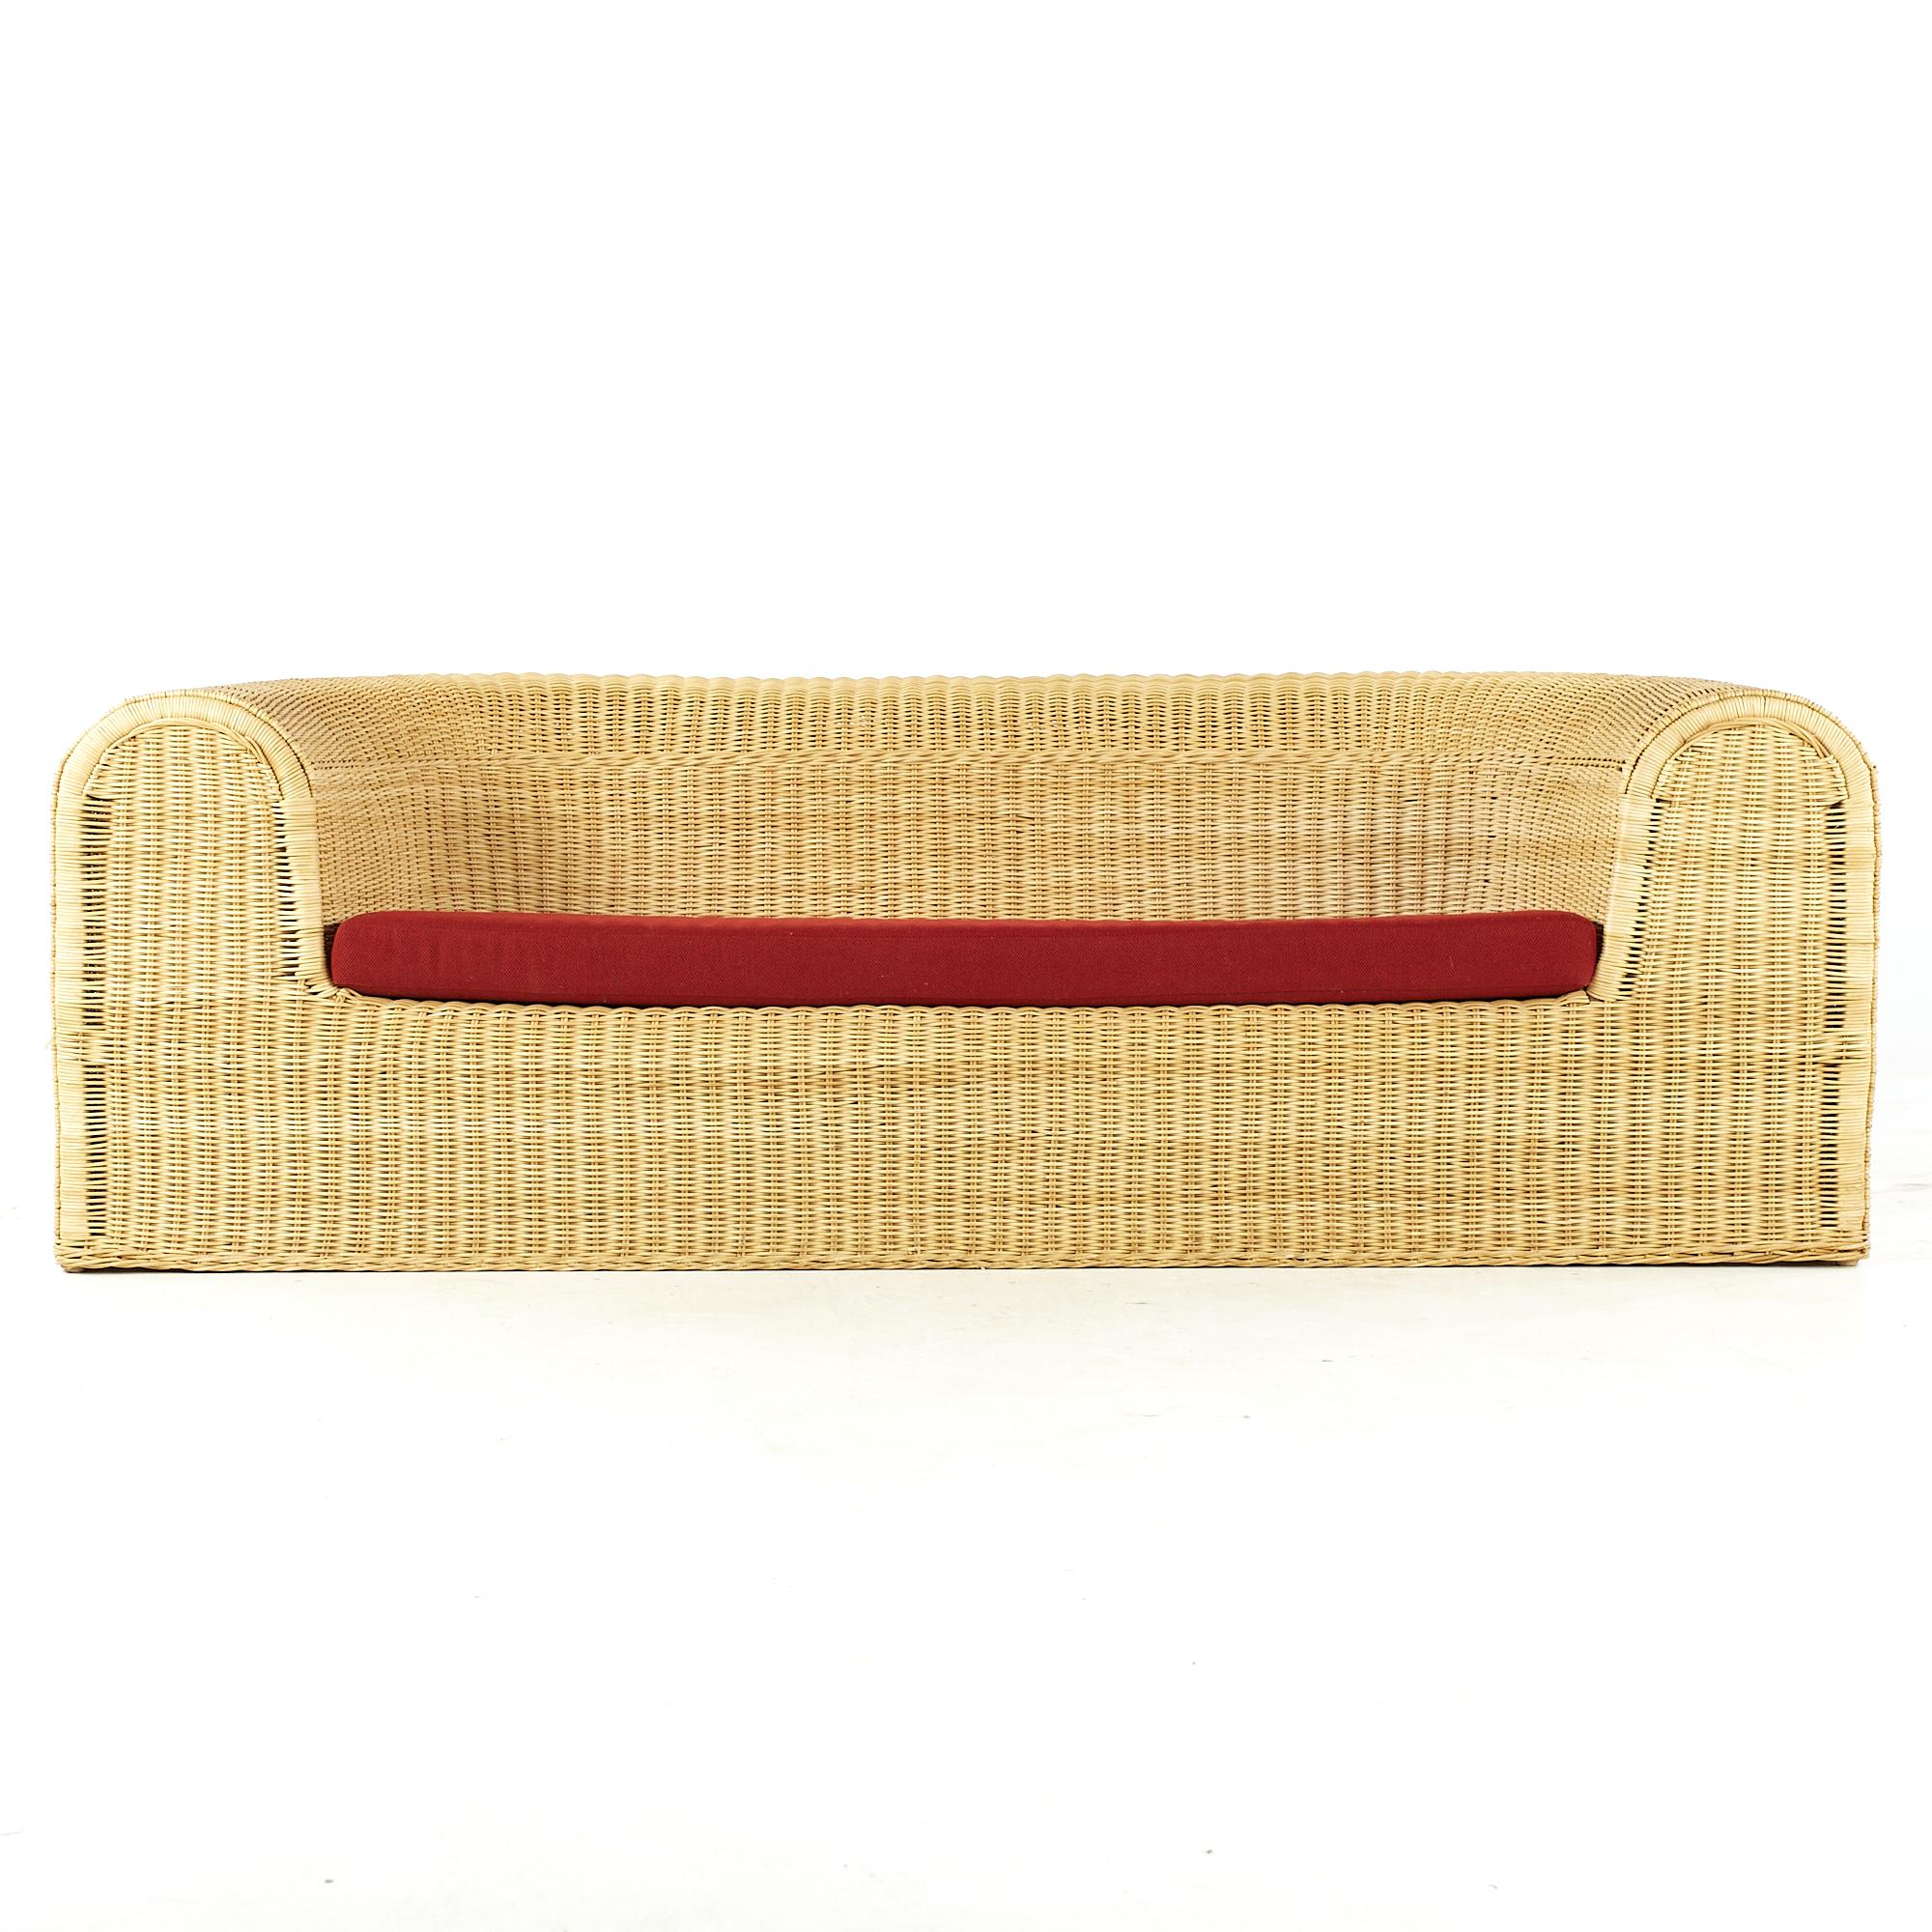 Eero Aarnio midcentury rattan sofa

This sofa measures: 76 wide x 32 deep x 24.5 inches high, with a seat height of 14.5 and arm height of 24.5 inches

All pieces of furniture can be had in what we call restored vintage condition. That means the